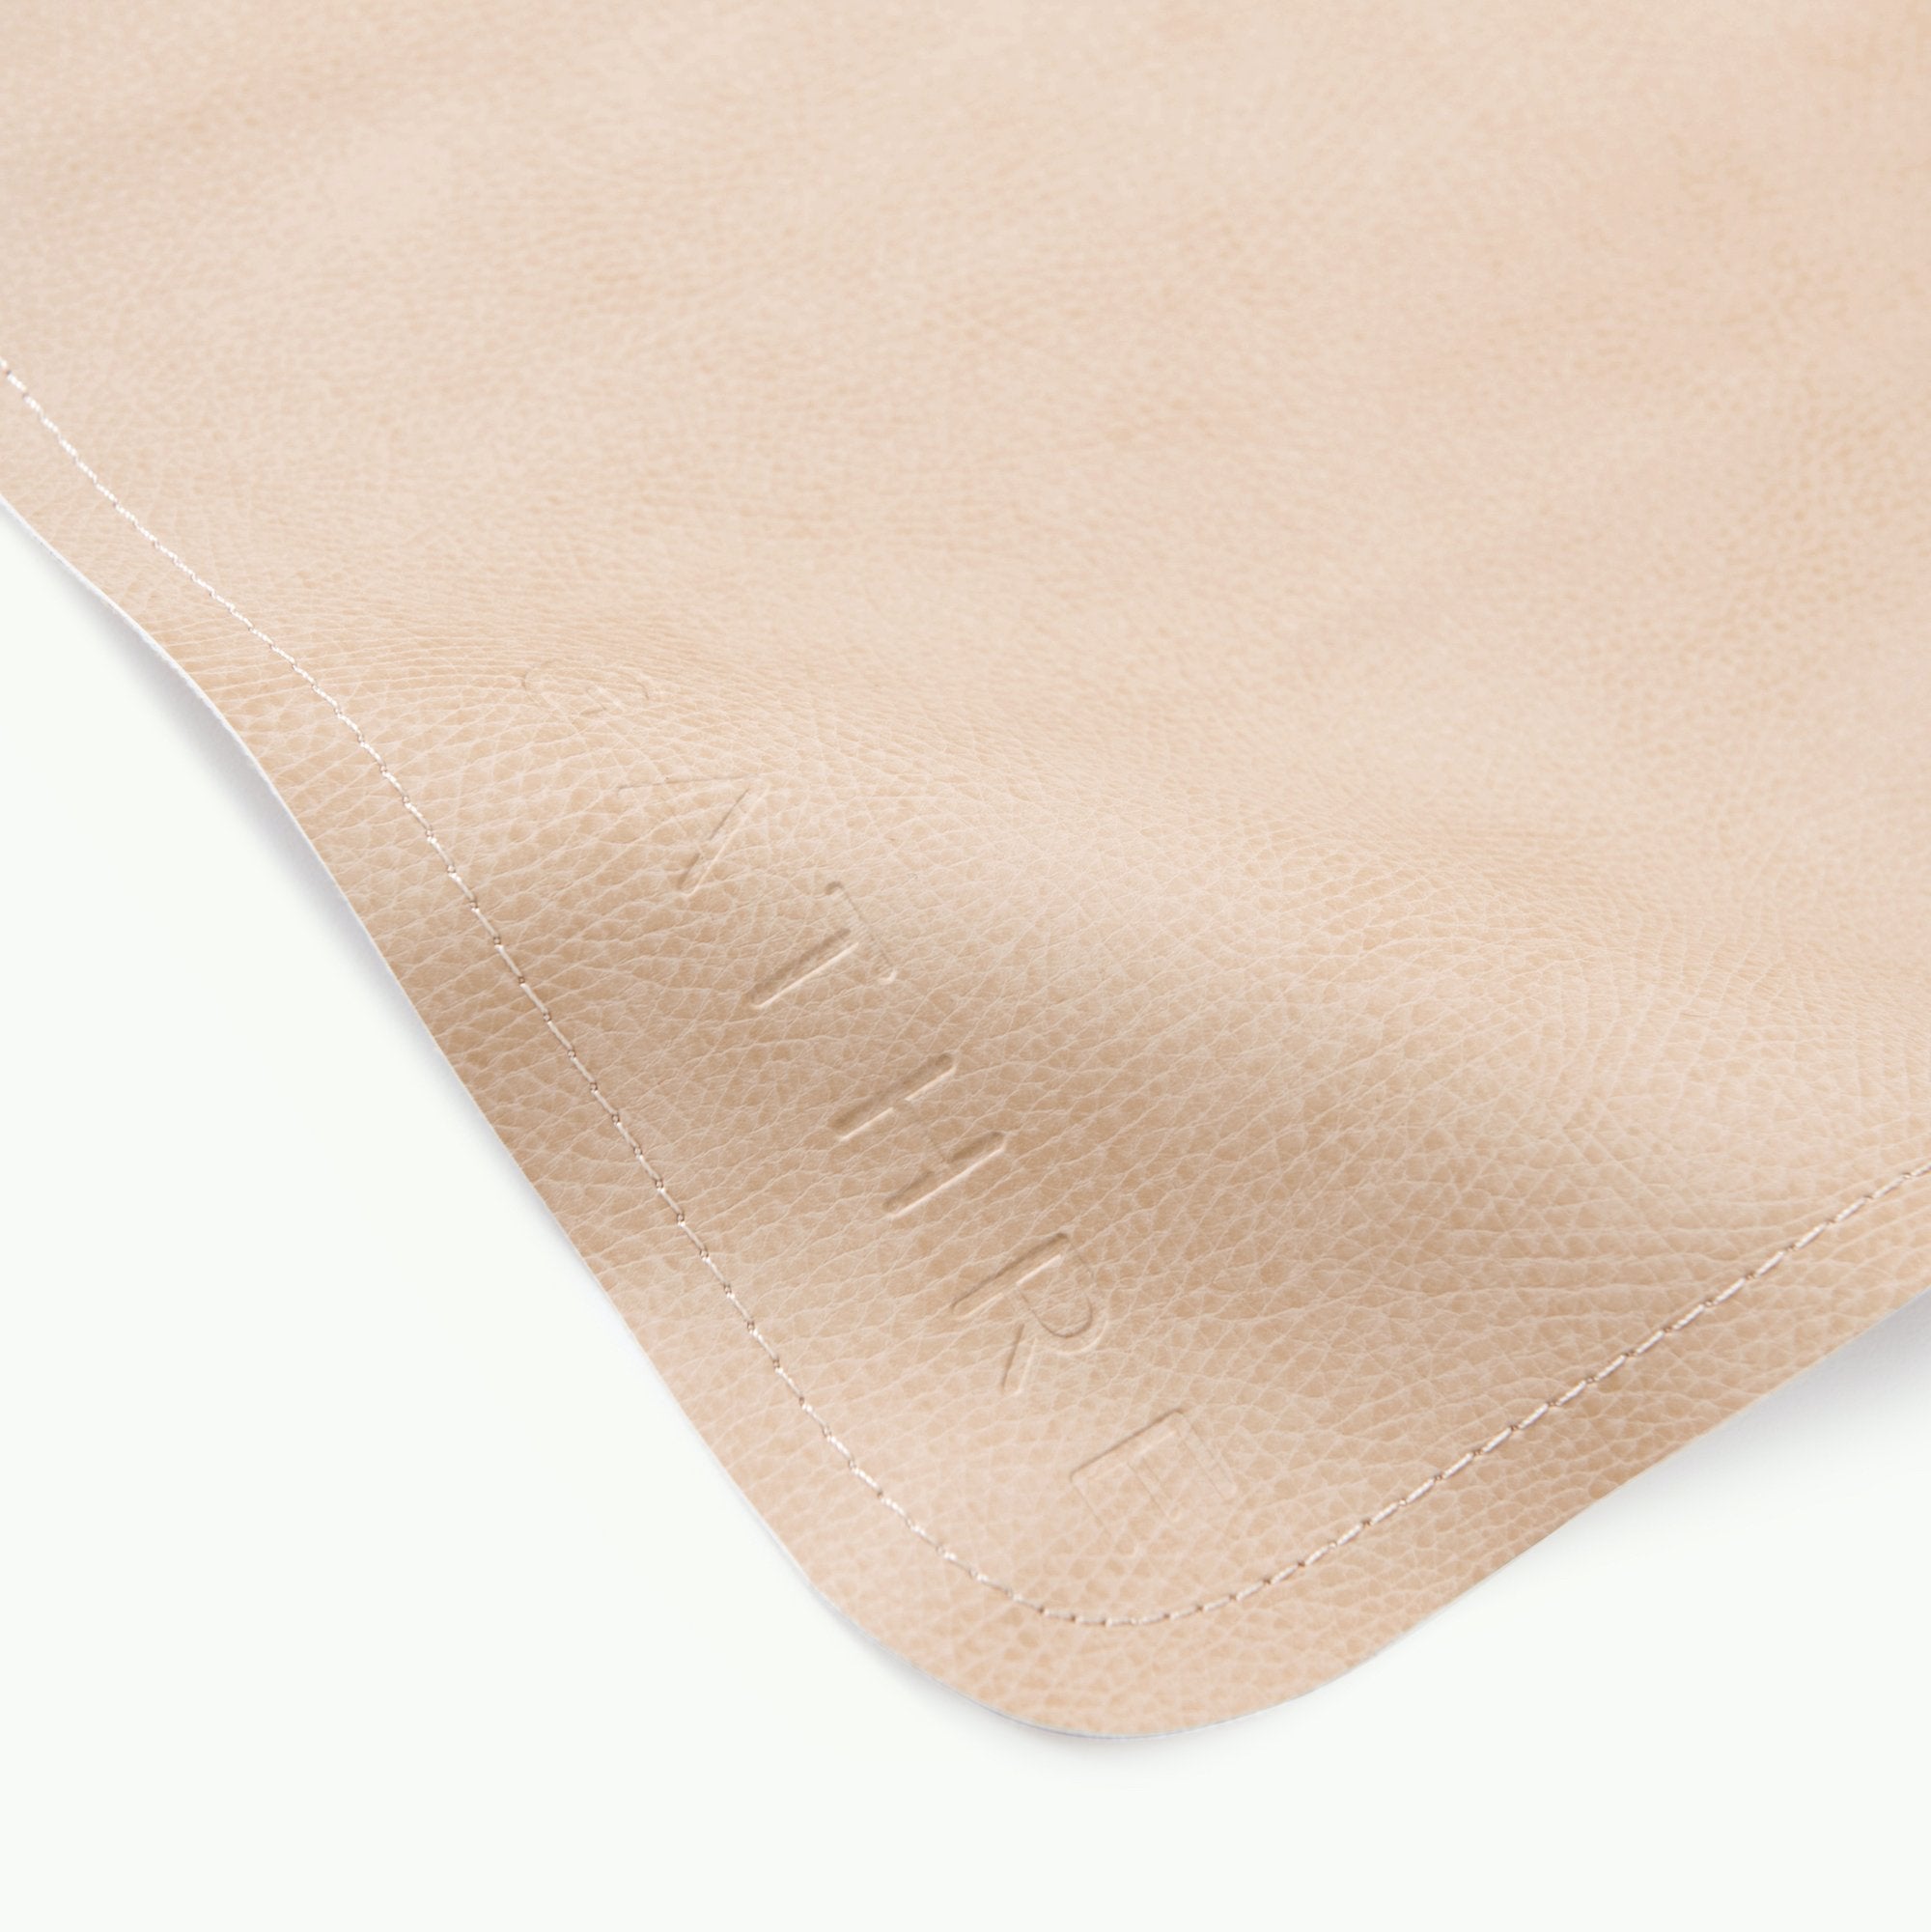 Untanned (on sale)@Gathre deboss detail on the Untanned Micro mat